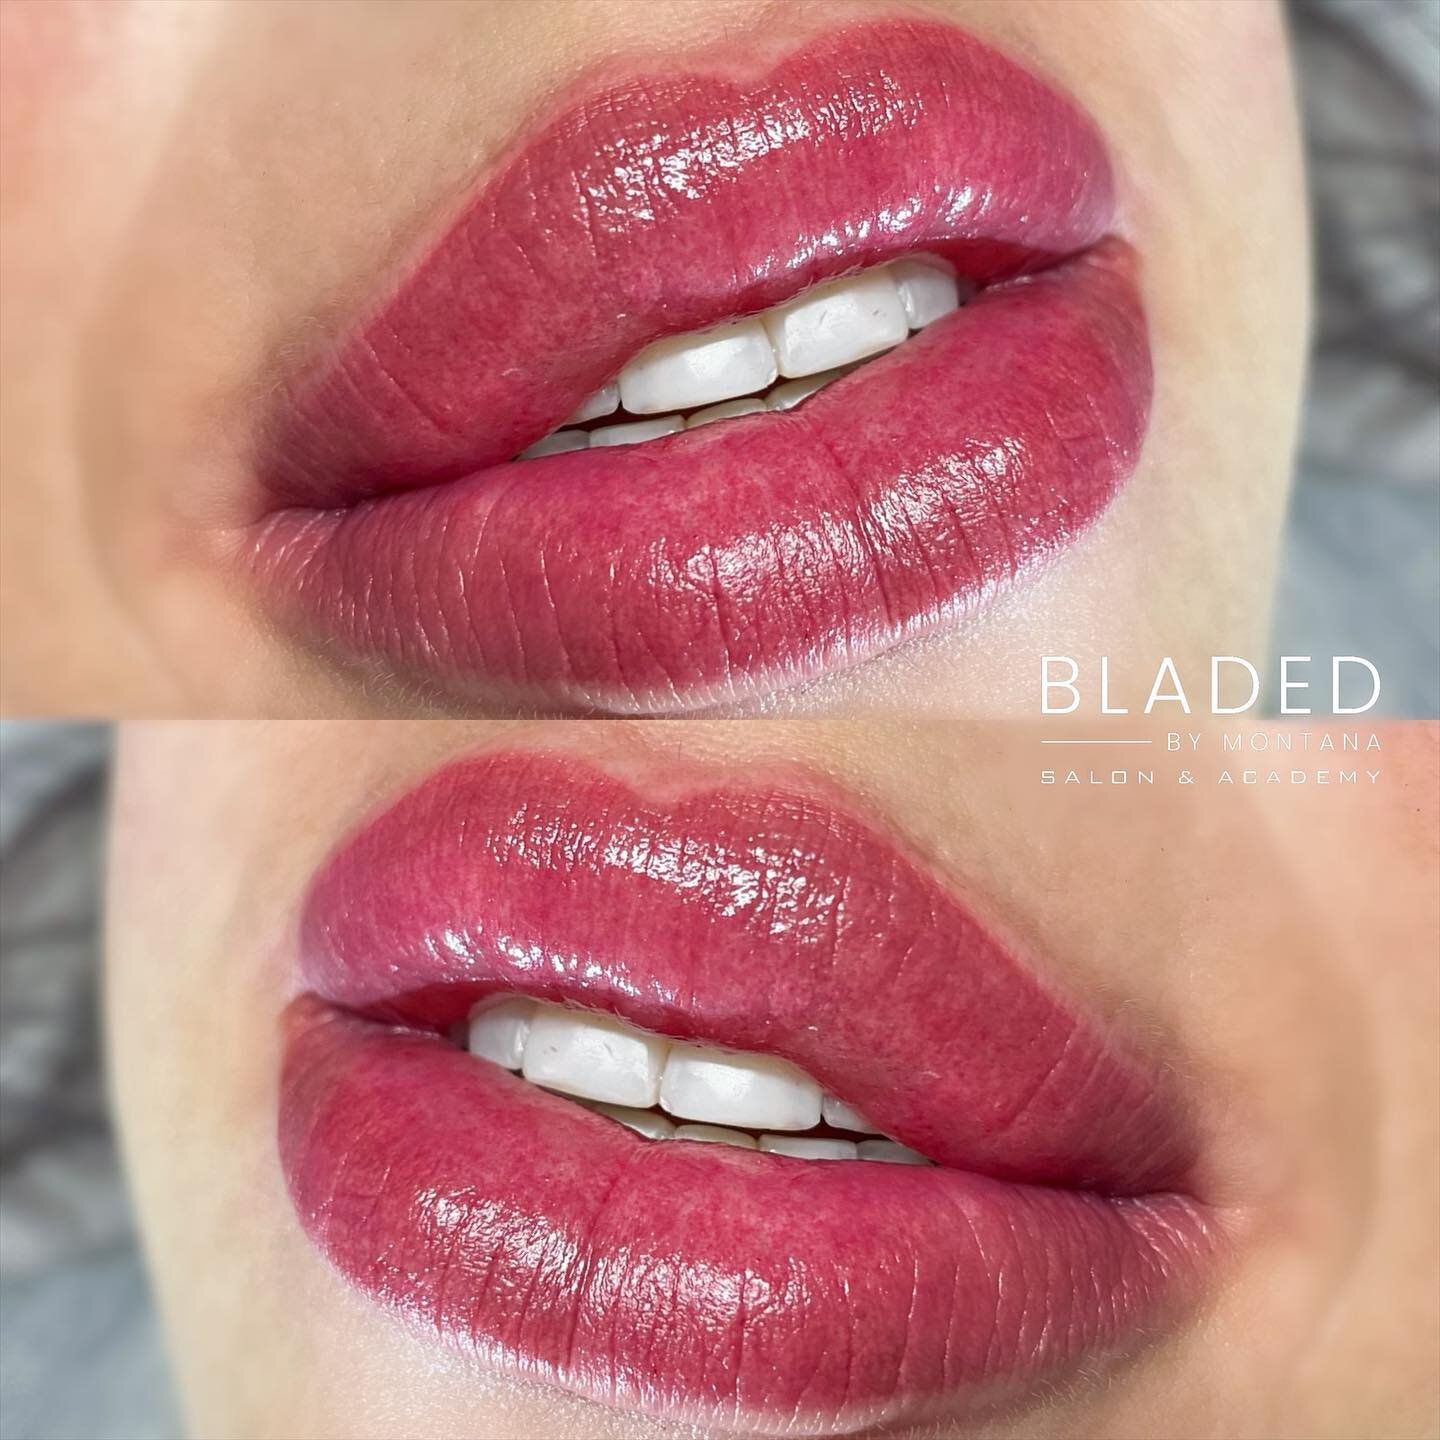 A mix of 🍇🍷

Loving this mauve/wine tone!💋

👄Lip blush heals 40% lighter and softer
👄Up to 5 days healing time
👄Results last anywhere between 2-4 years 

__________________________________________________

📧 For booking inquiries please visit 